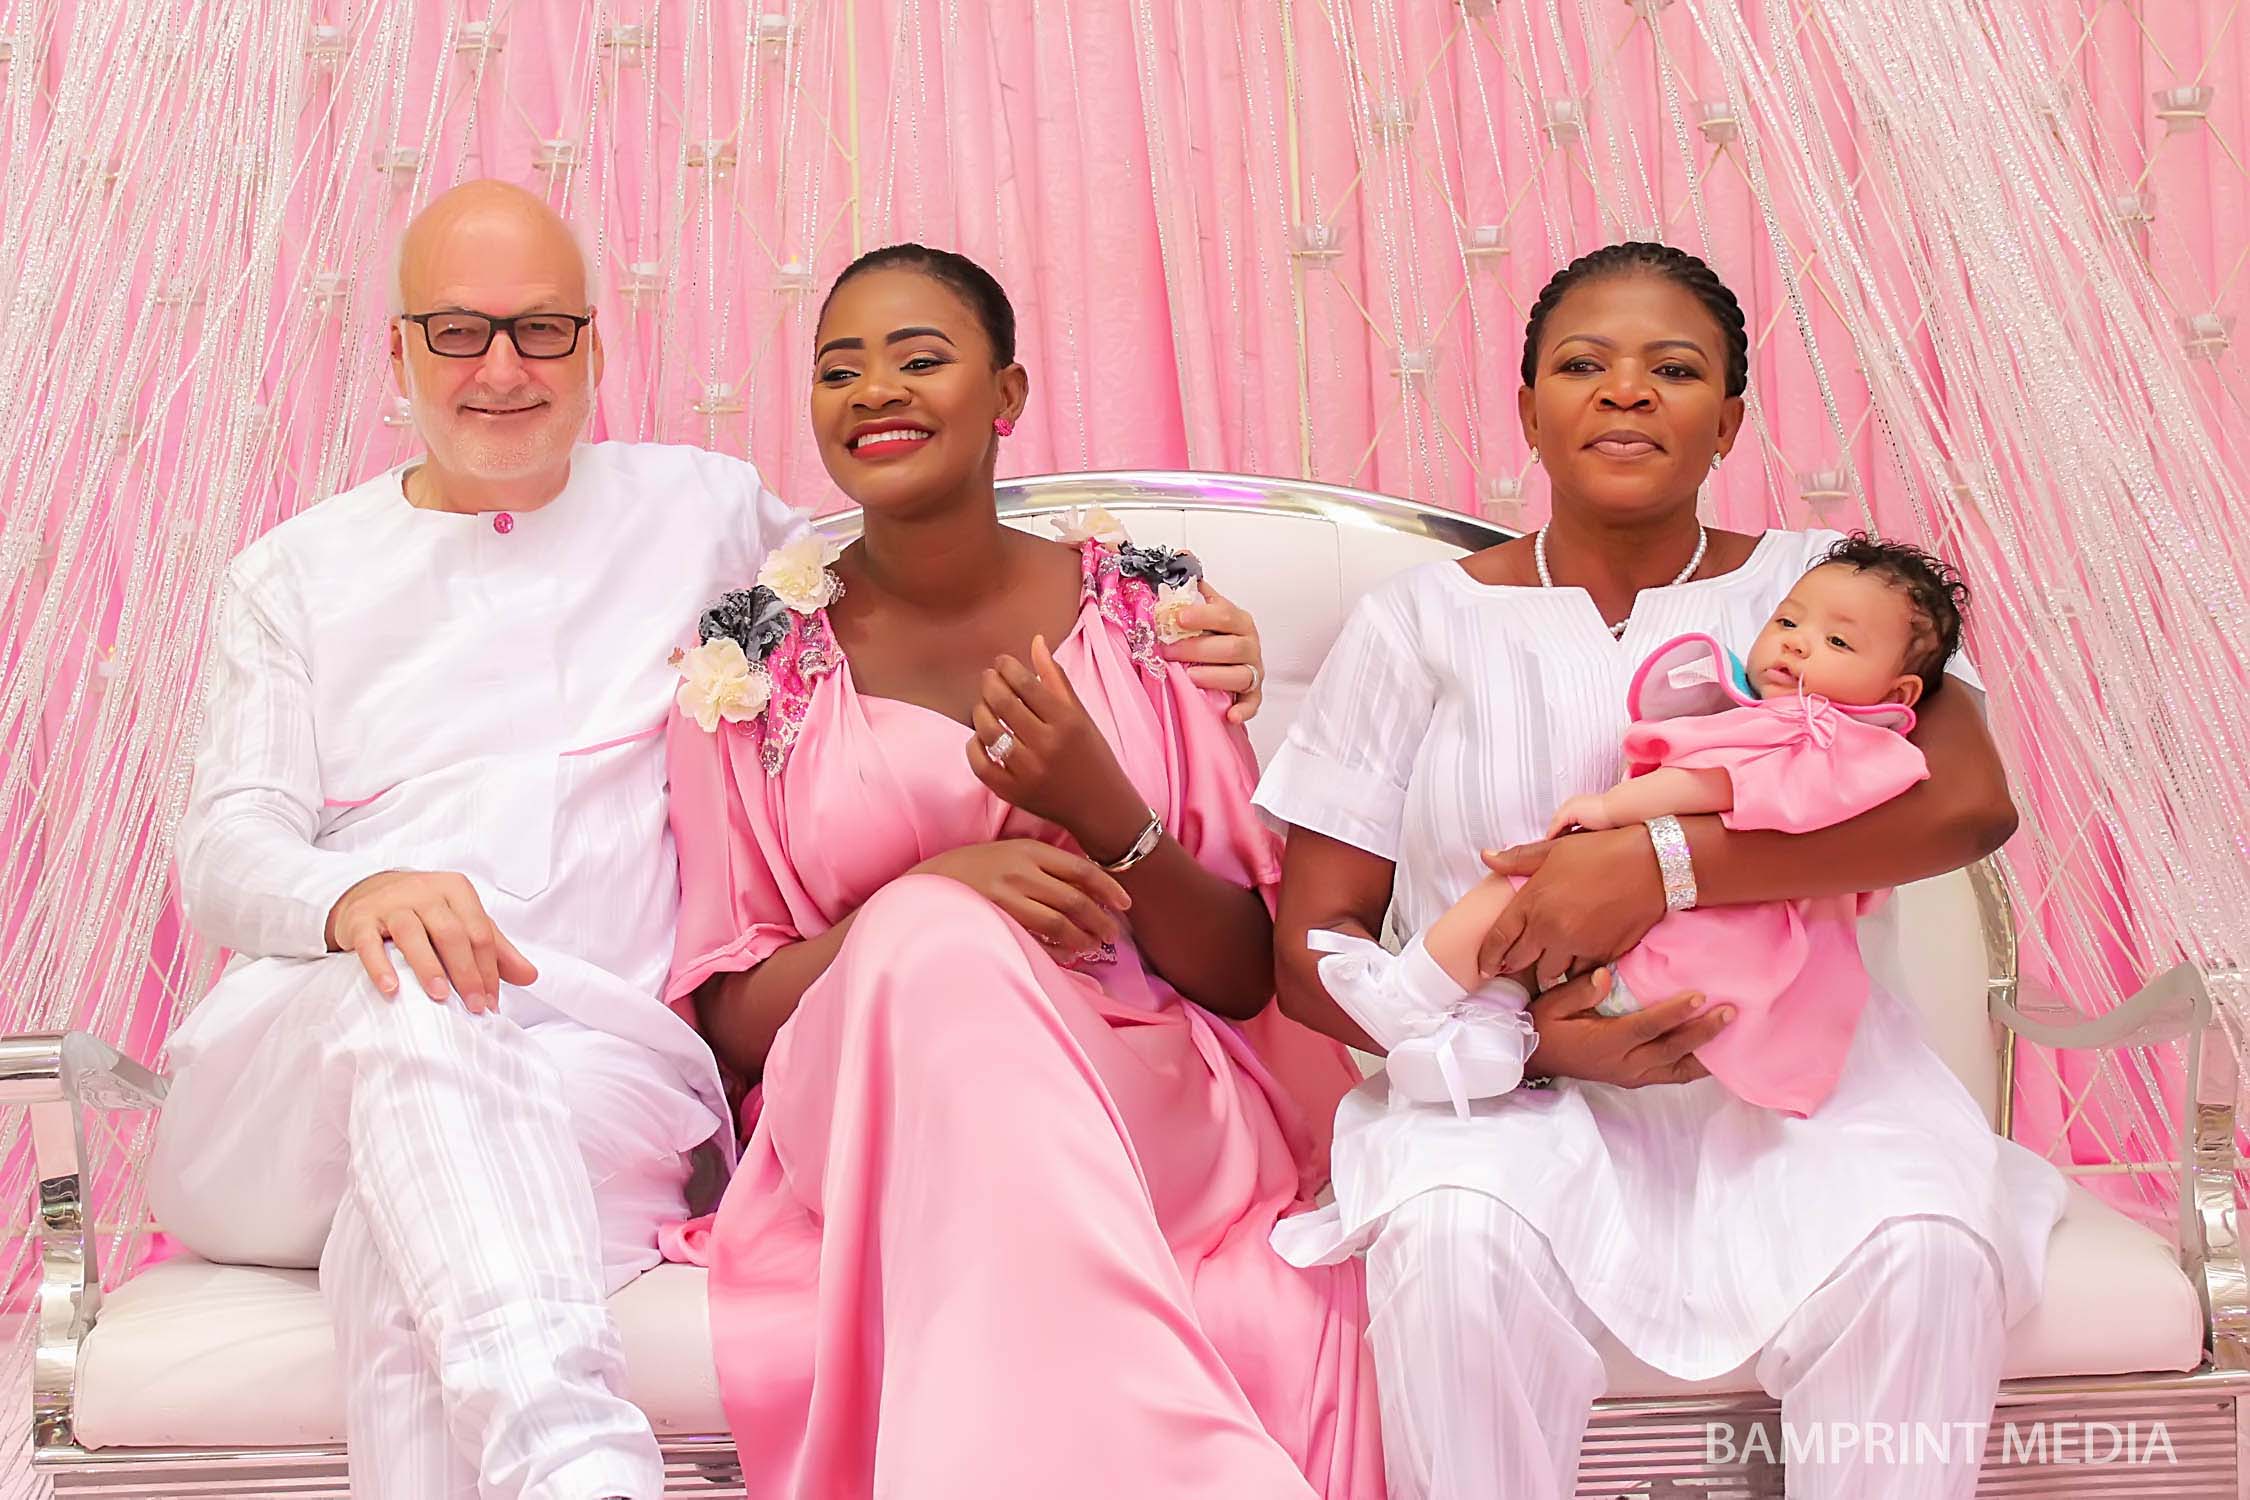 See Fab Photos Of Celebrities, Food, Cakes And Everything That Happened At The Naming Ceremony Of Kafui Danku’s Daughter